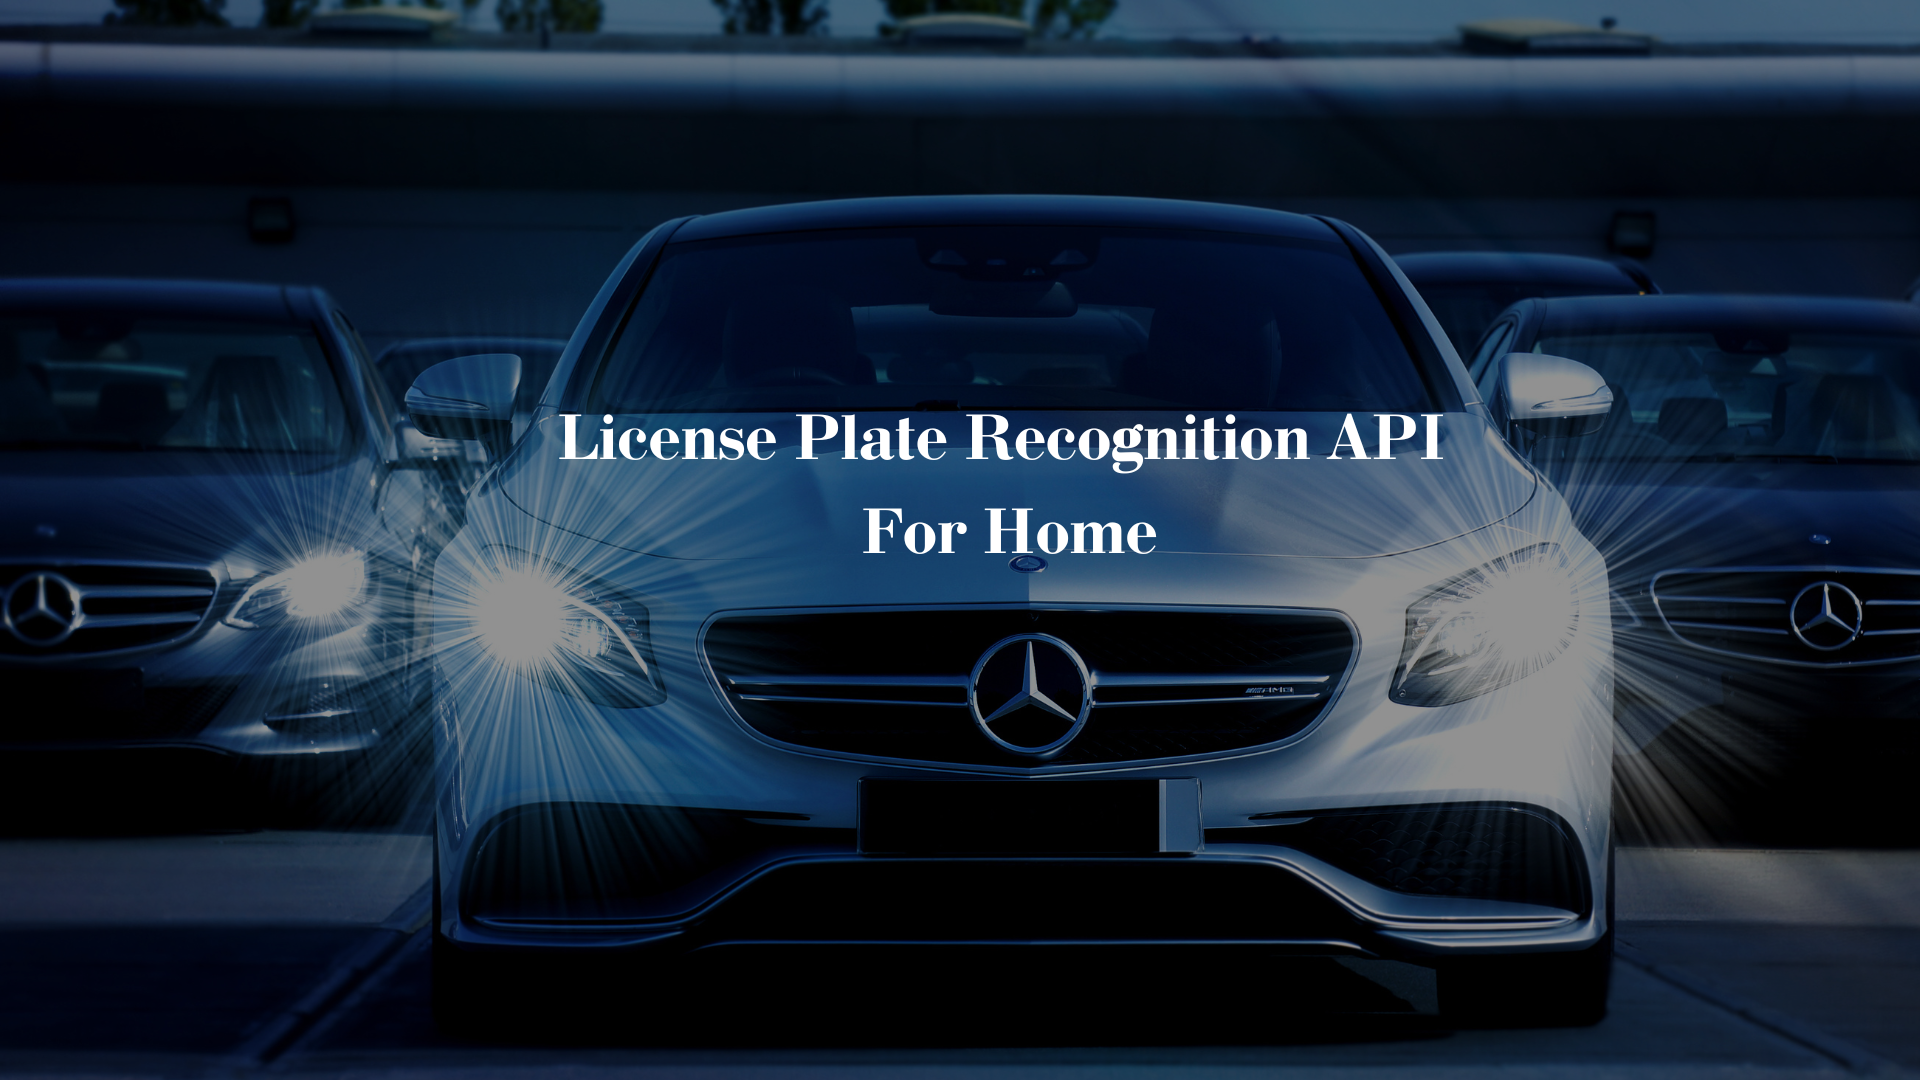 License Plate Recognition API For Home